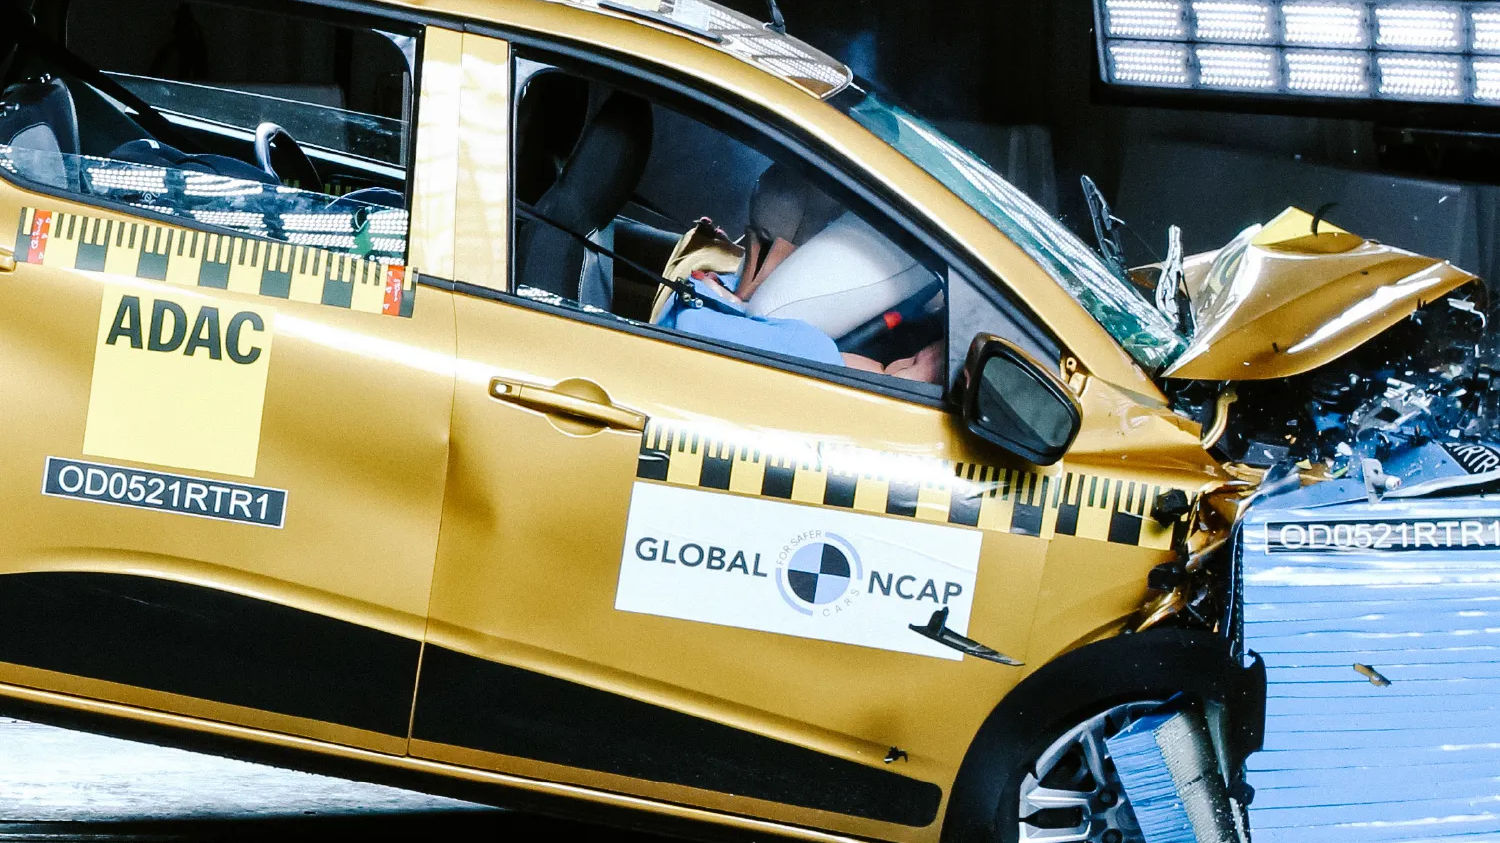 What is Global NCAP test and how it works?